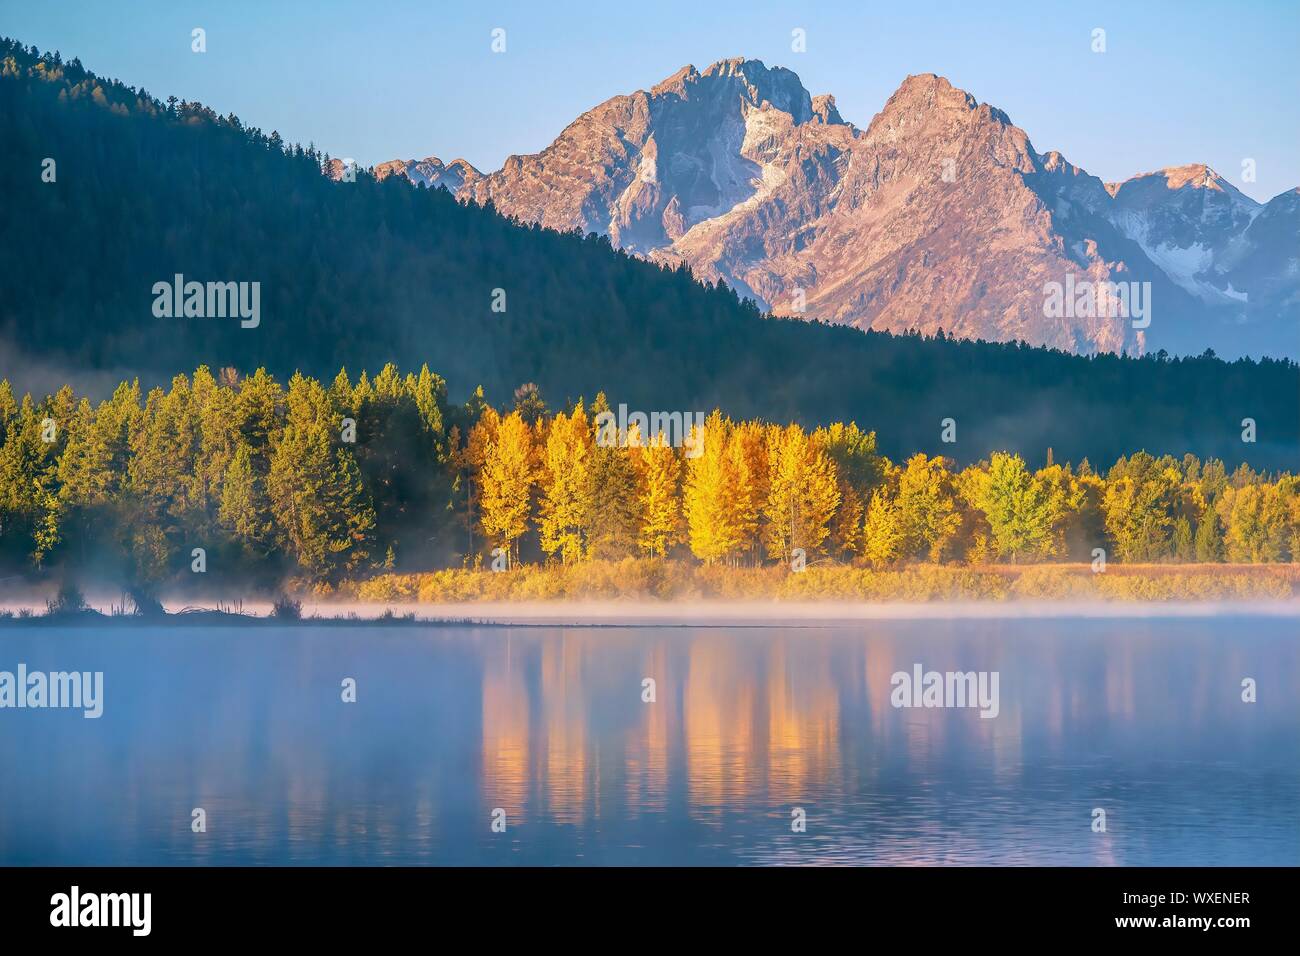 Grand Teton National Park, with mist on the water, colorful aspen trees, evergreen forest, and the craggy Teton mountain range. Stock Photo